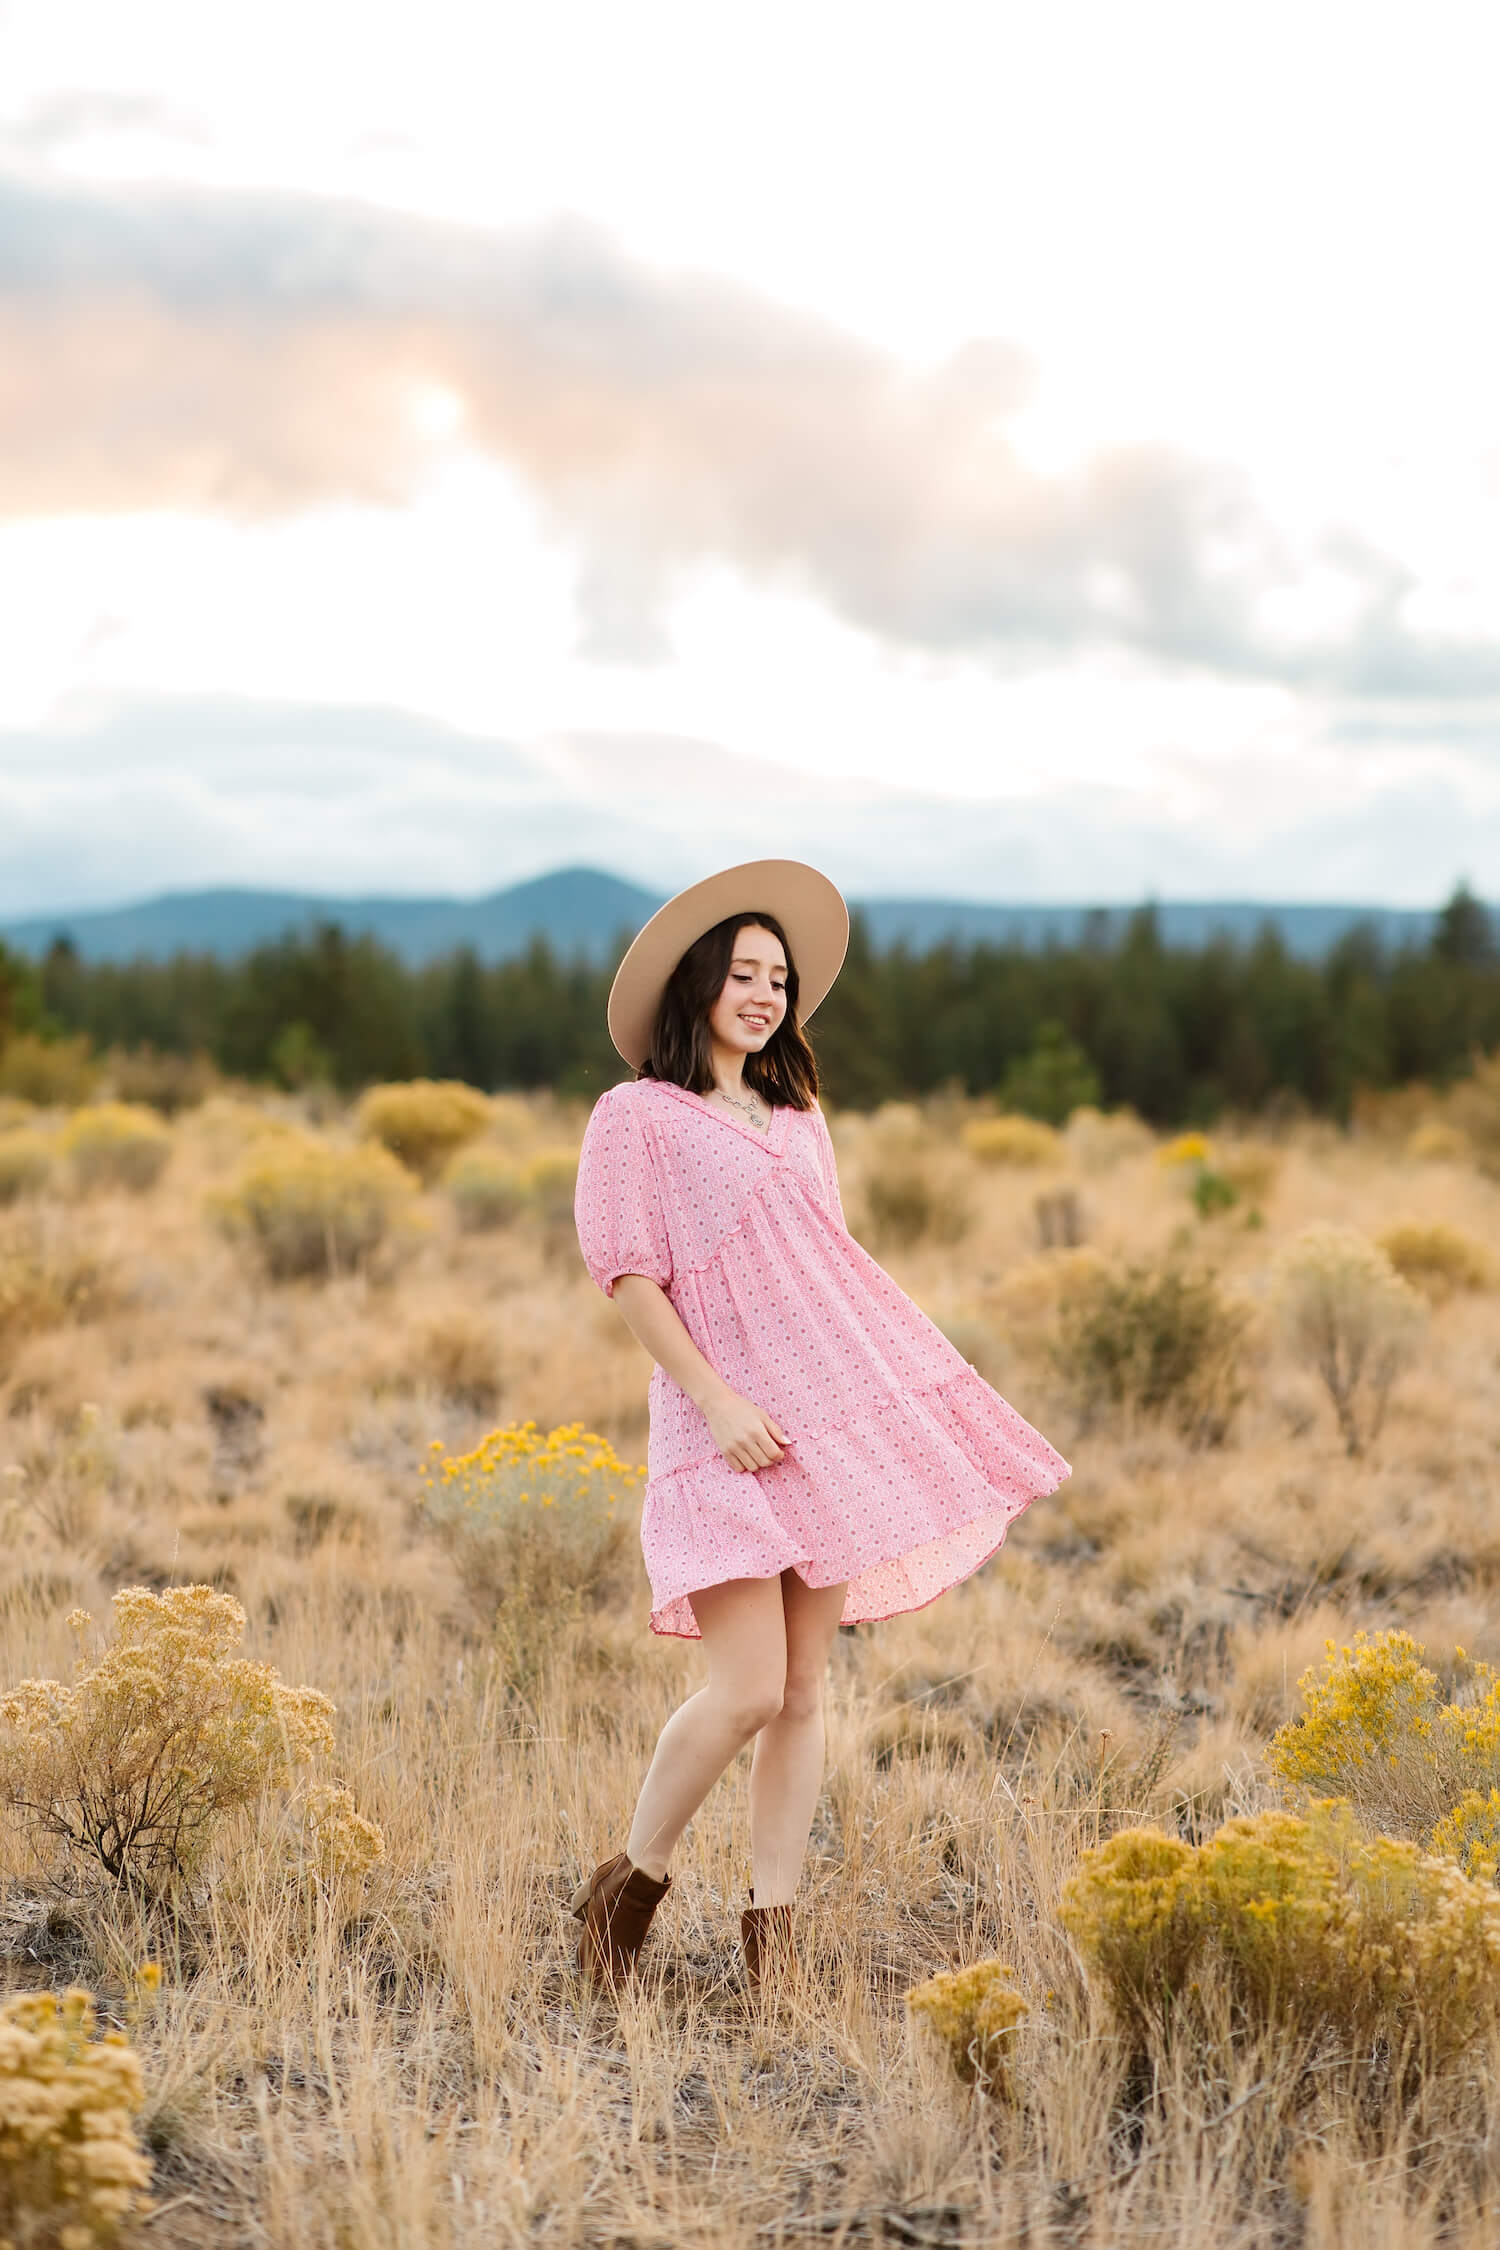 brunette girl in pink dress and tan rancher hat standing in open field in bend